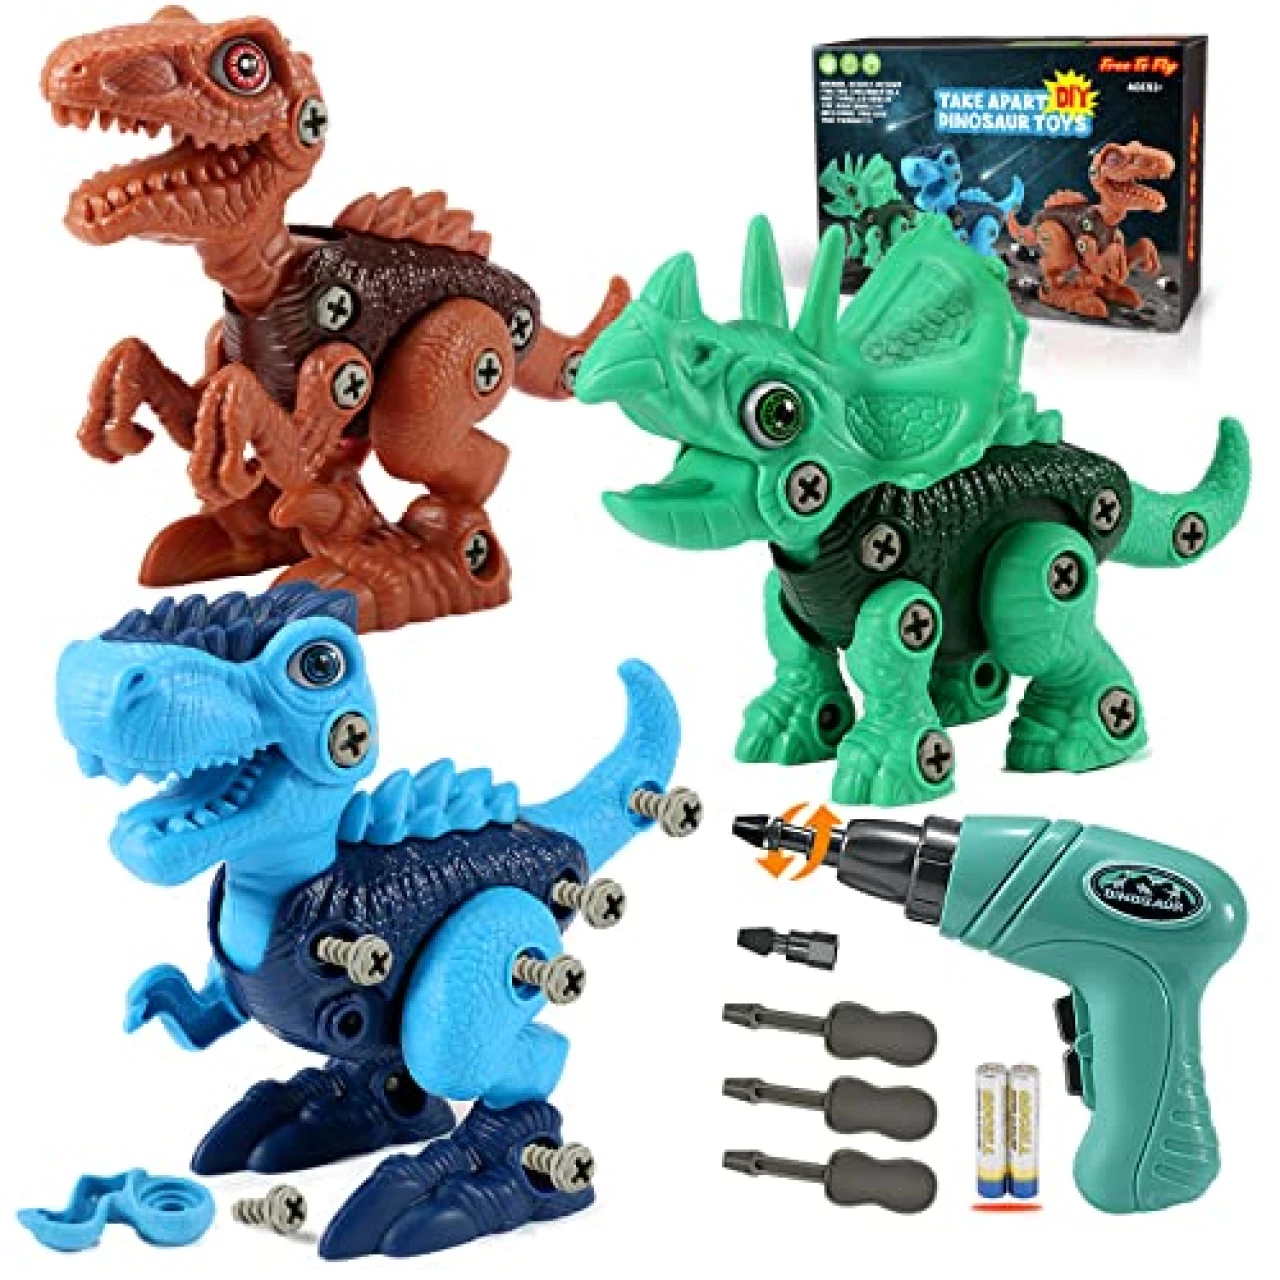 FREE TO FLY Kids Toys Stem Dinosaur Toy: Take Apart Toys for Kids 3-5 Learning Educational Building Sets with Electric Drill